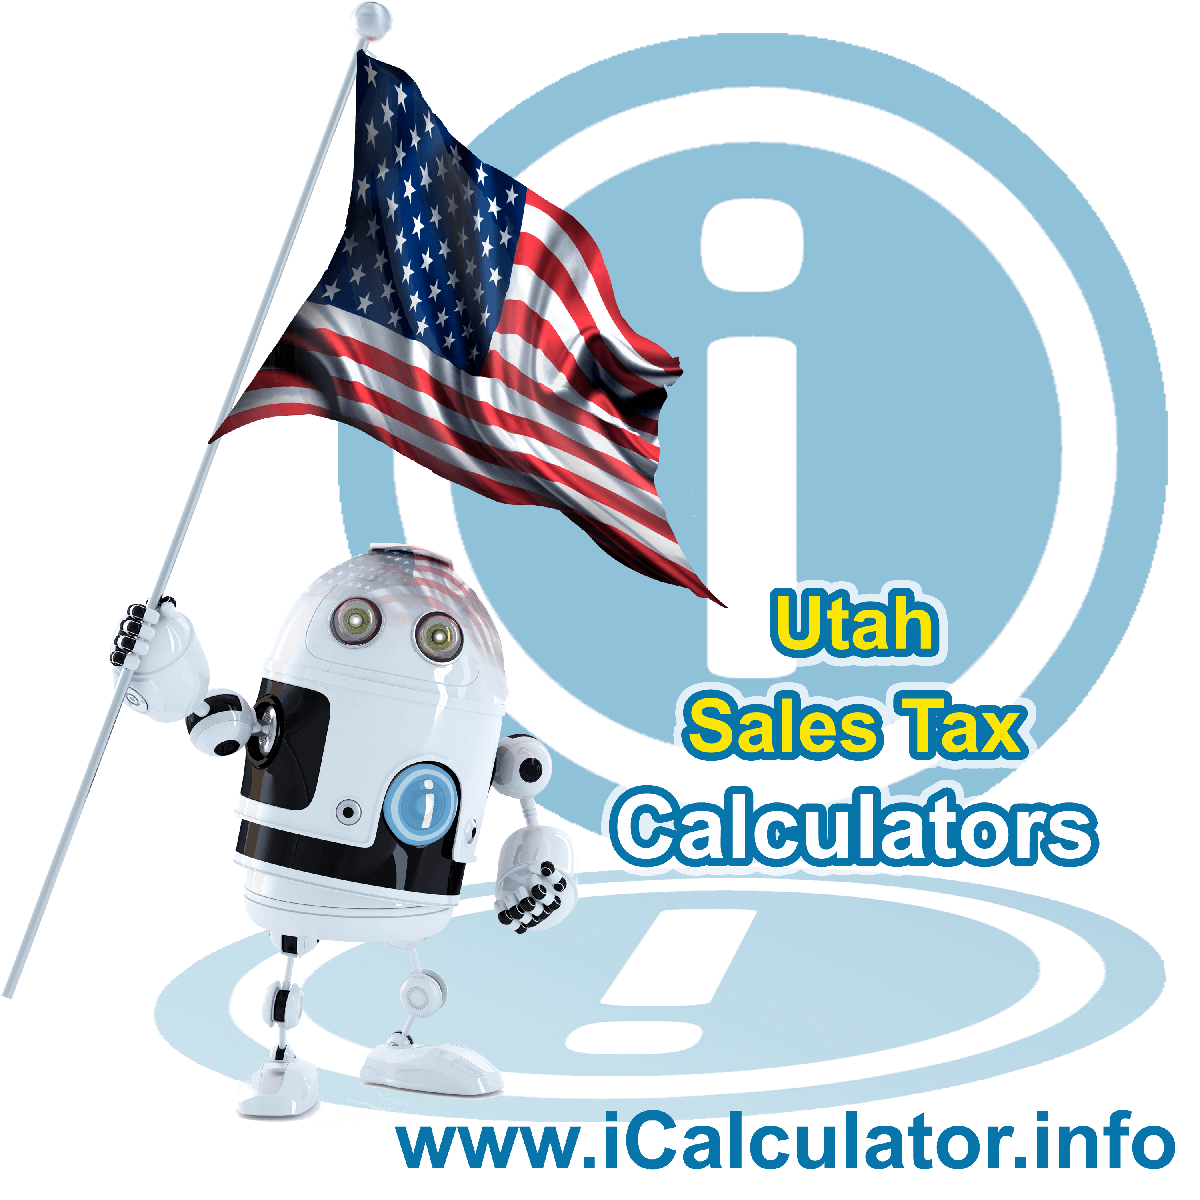 Piute County Sales Rates: This image illustrates a calculator robot calculating Piute County sales tax manually using the Piute County Sales Tax Formula. You can use this information to calculate Piute County Sales Tax manually or use the Piute County Sales Tax Calculator to calculate sales tax online.